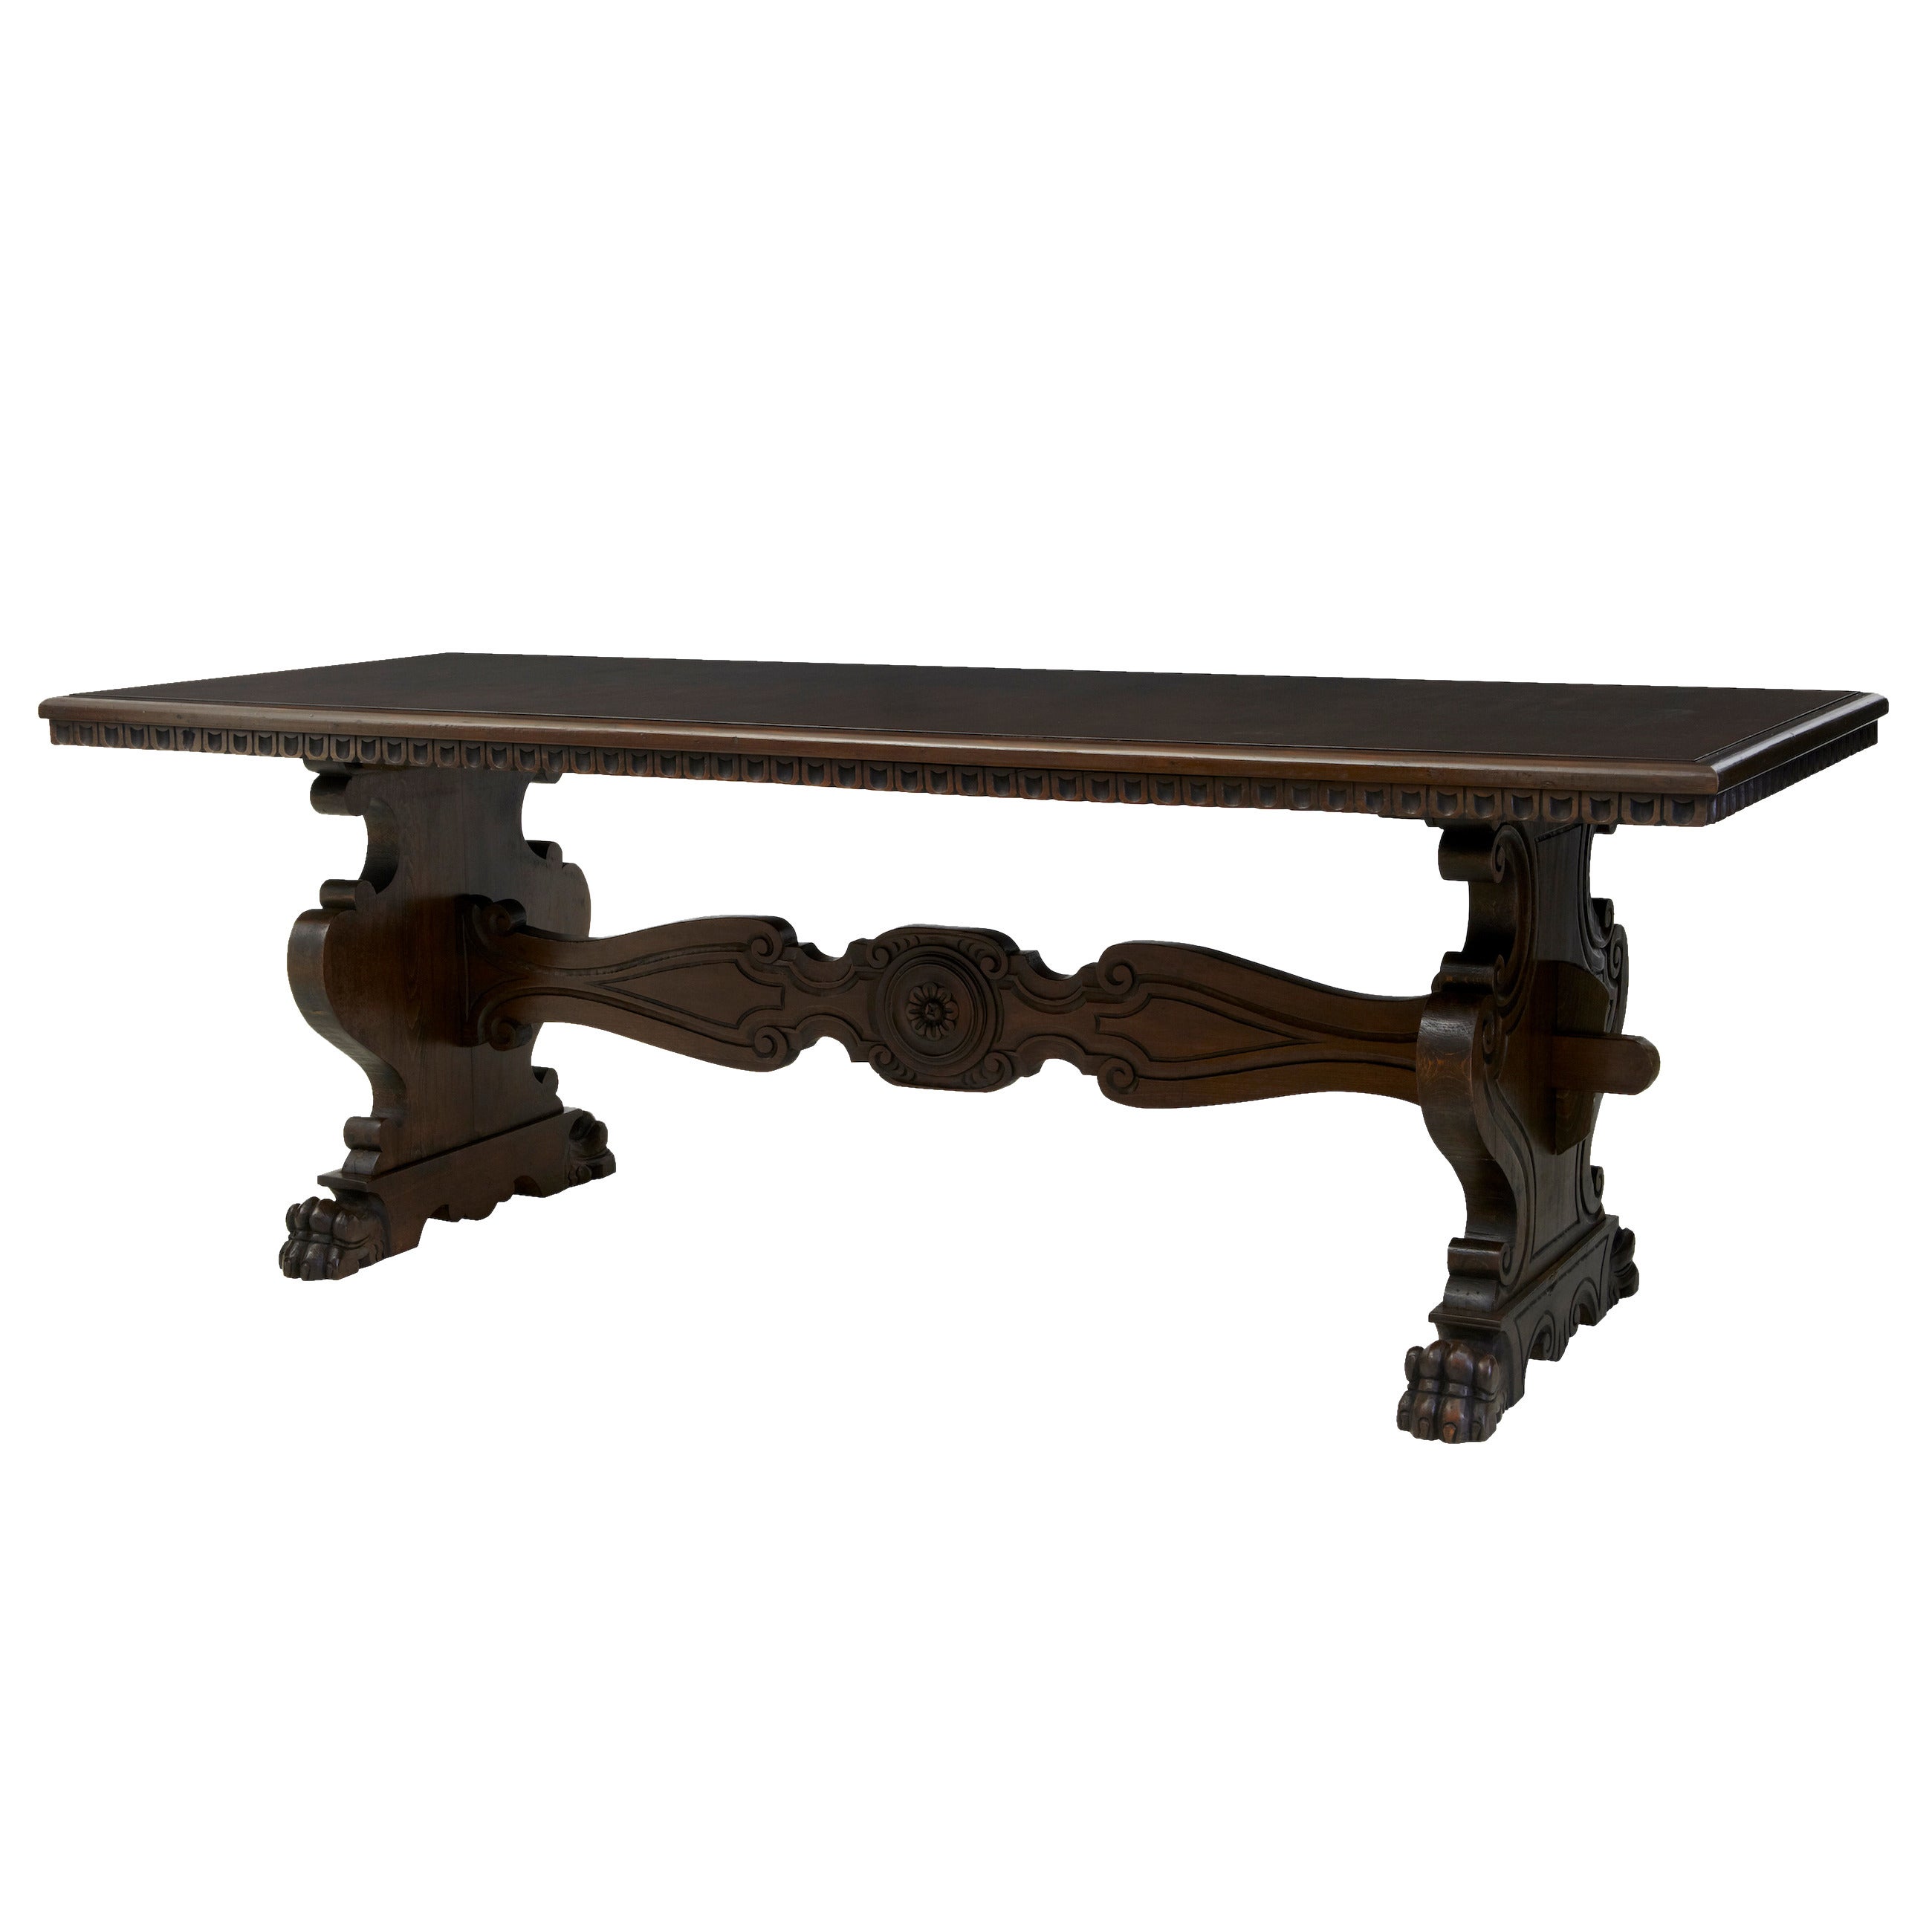 20th Century Carved Oak Spanish Influenced Refectory Dining Table